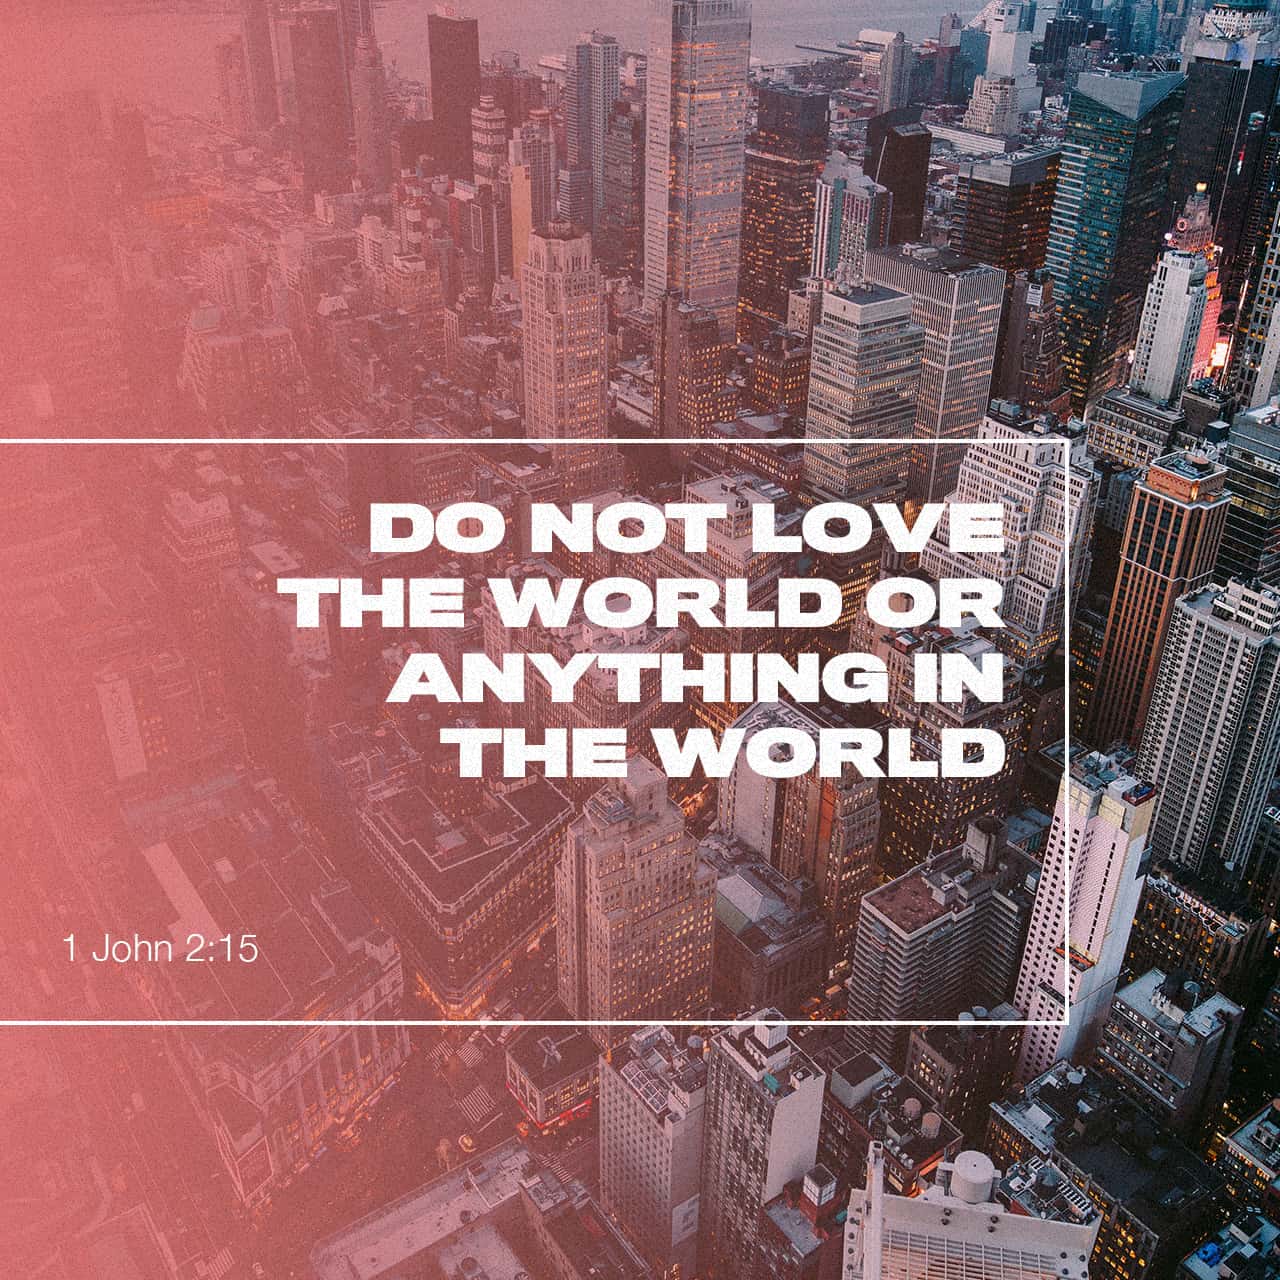 1 John 2:15-17 Love not the world, neither the things that are in the  world. If any man love the world, the love of the Father is not in him. For  all